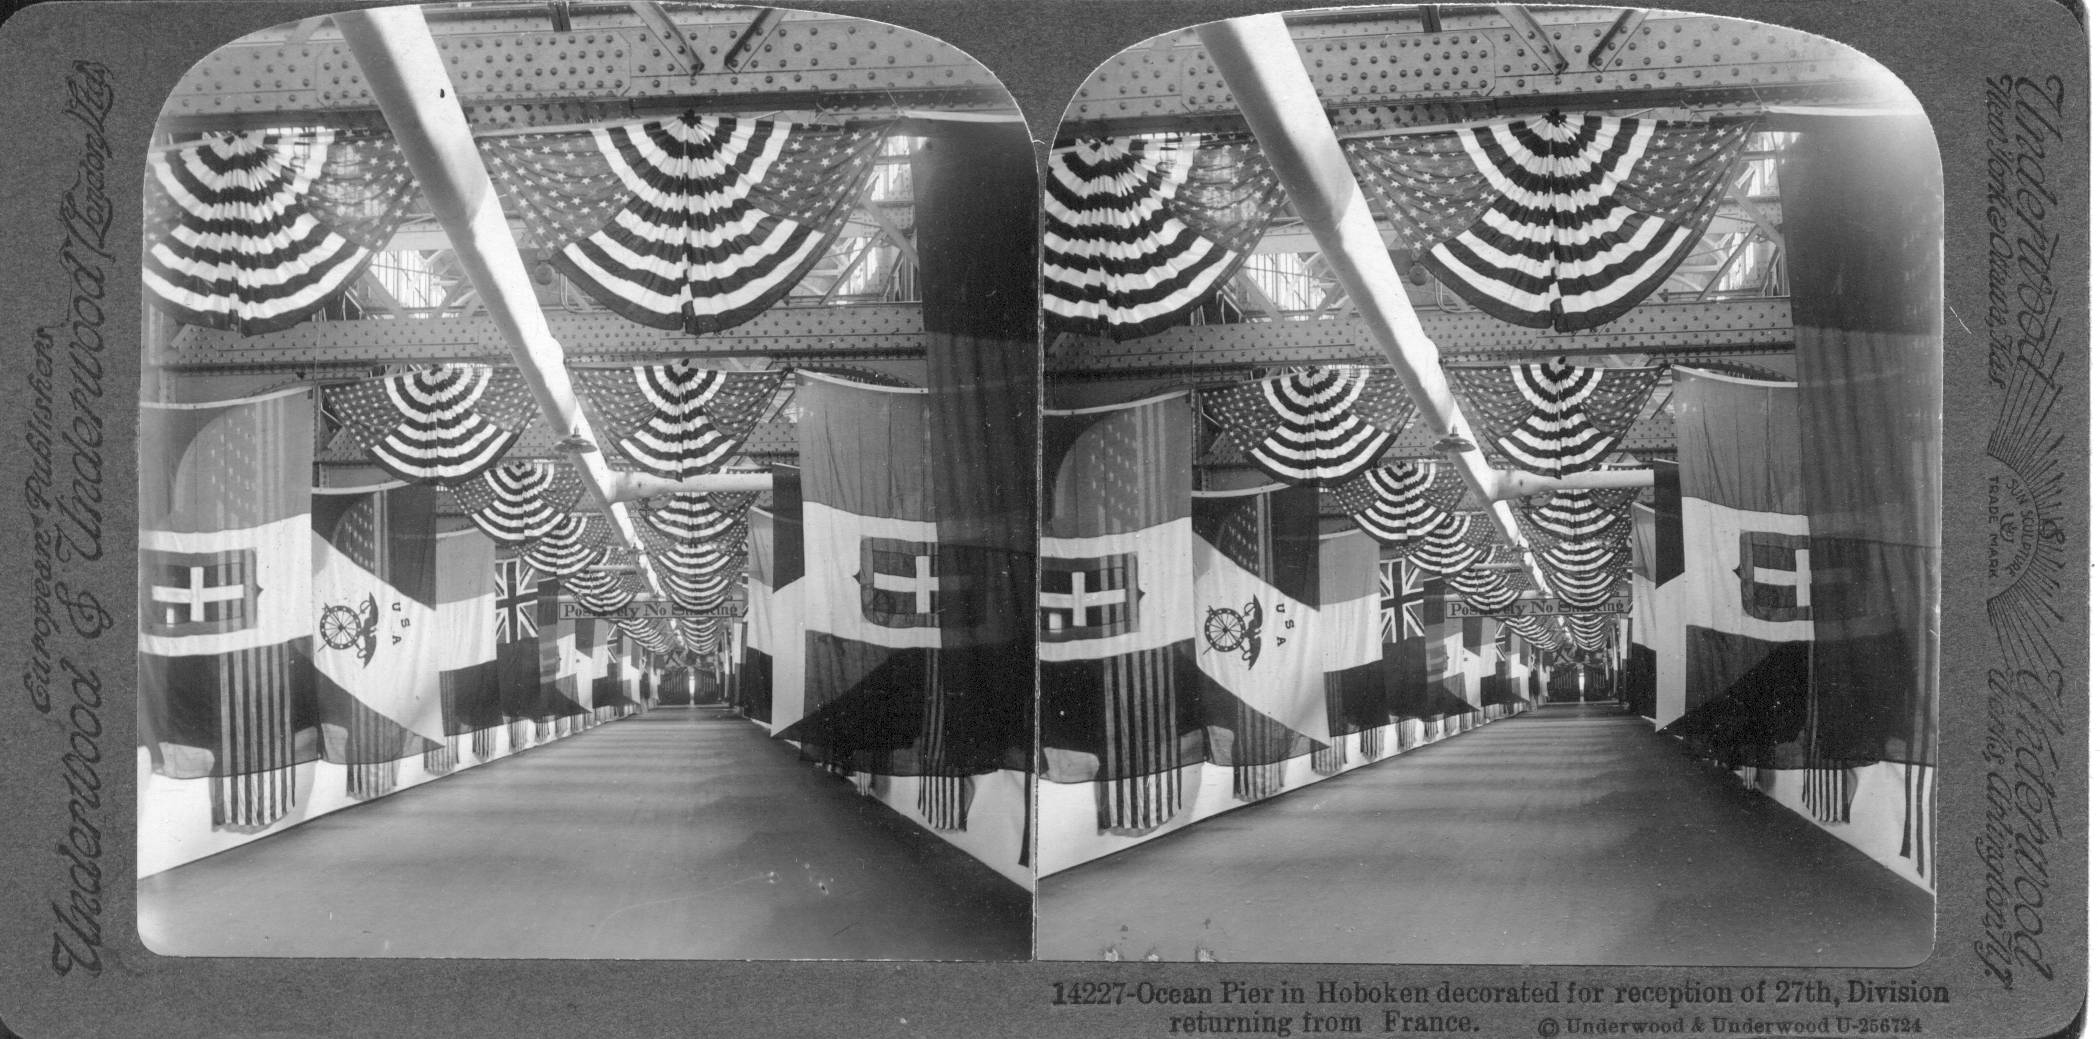 Ocean Pier in Hoboken decorated for reception of 27th Division returning from France